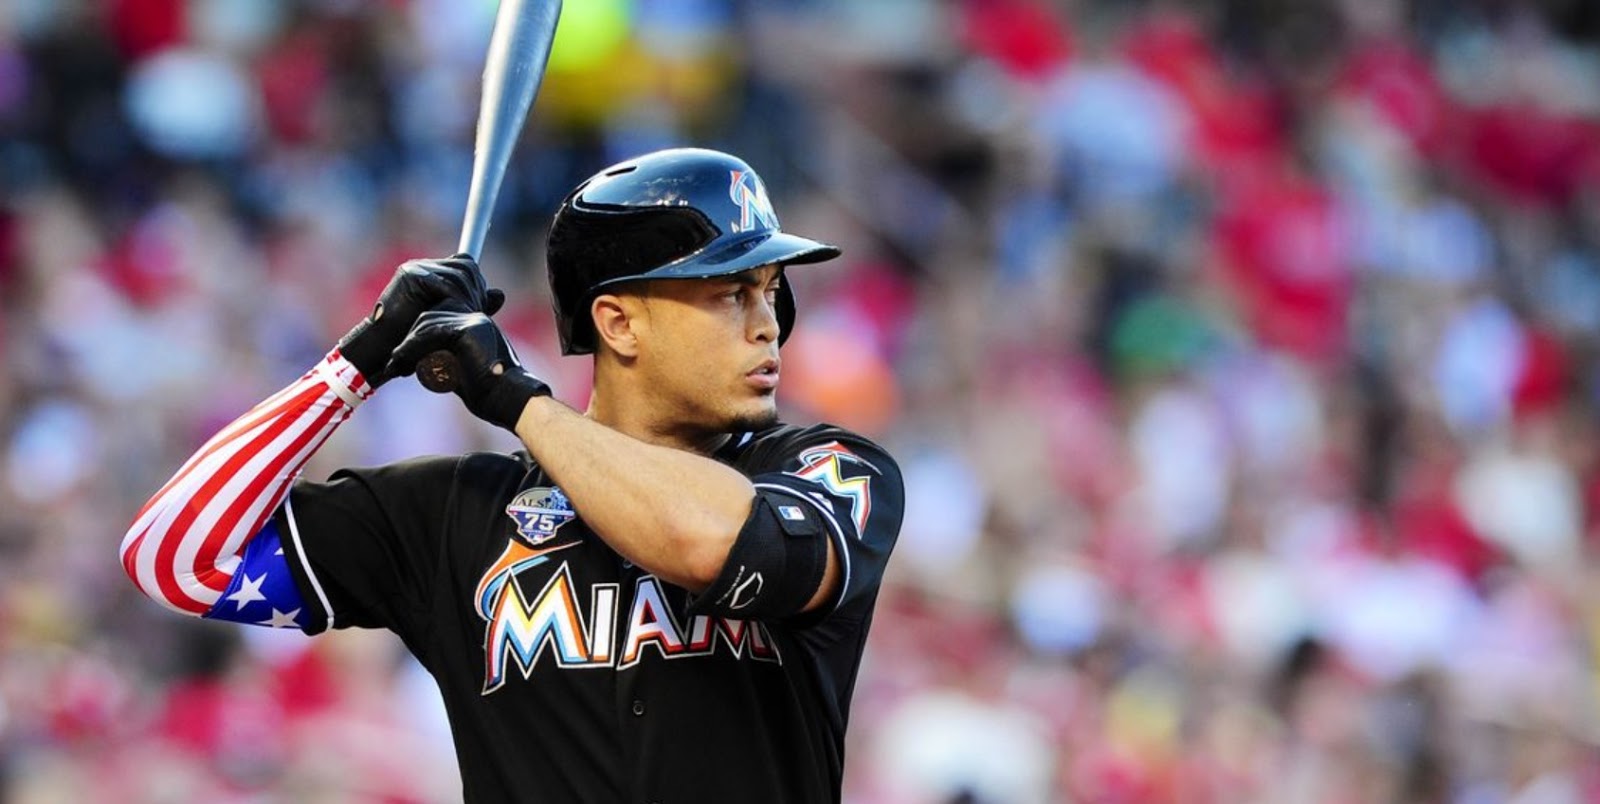 the richest mlb player is Giancarlo Stanton 2017